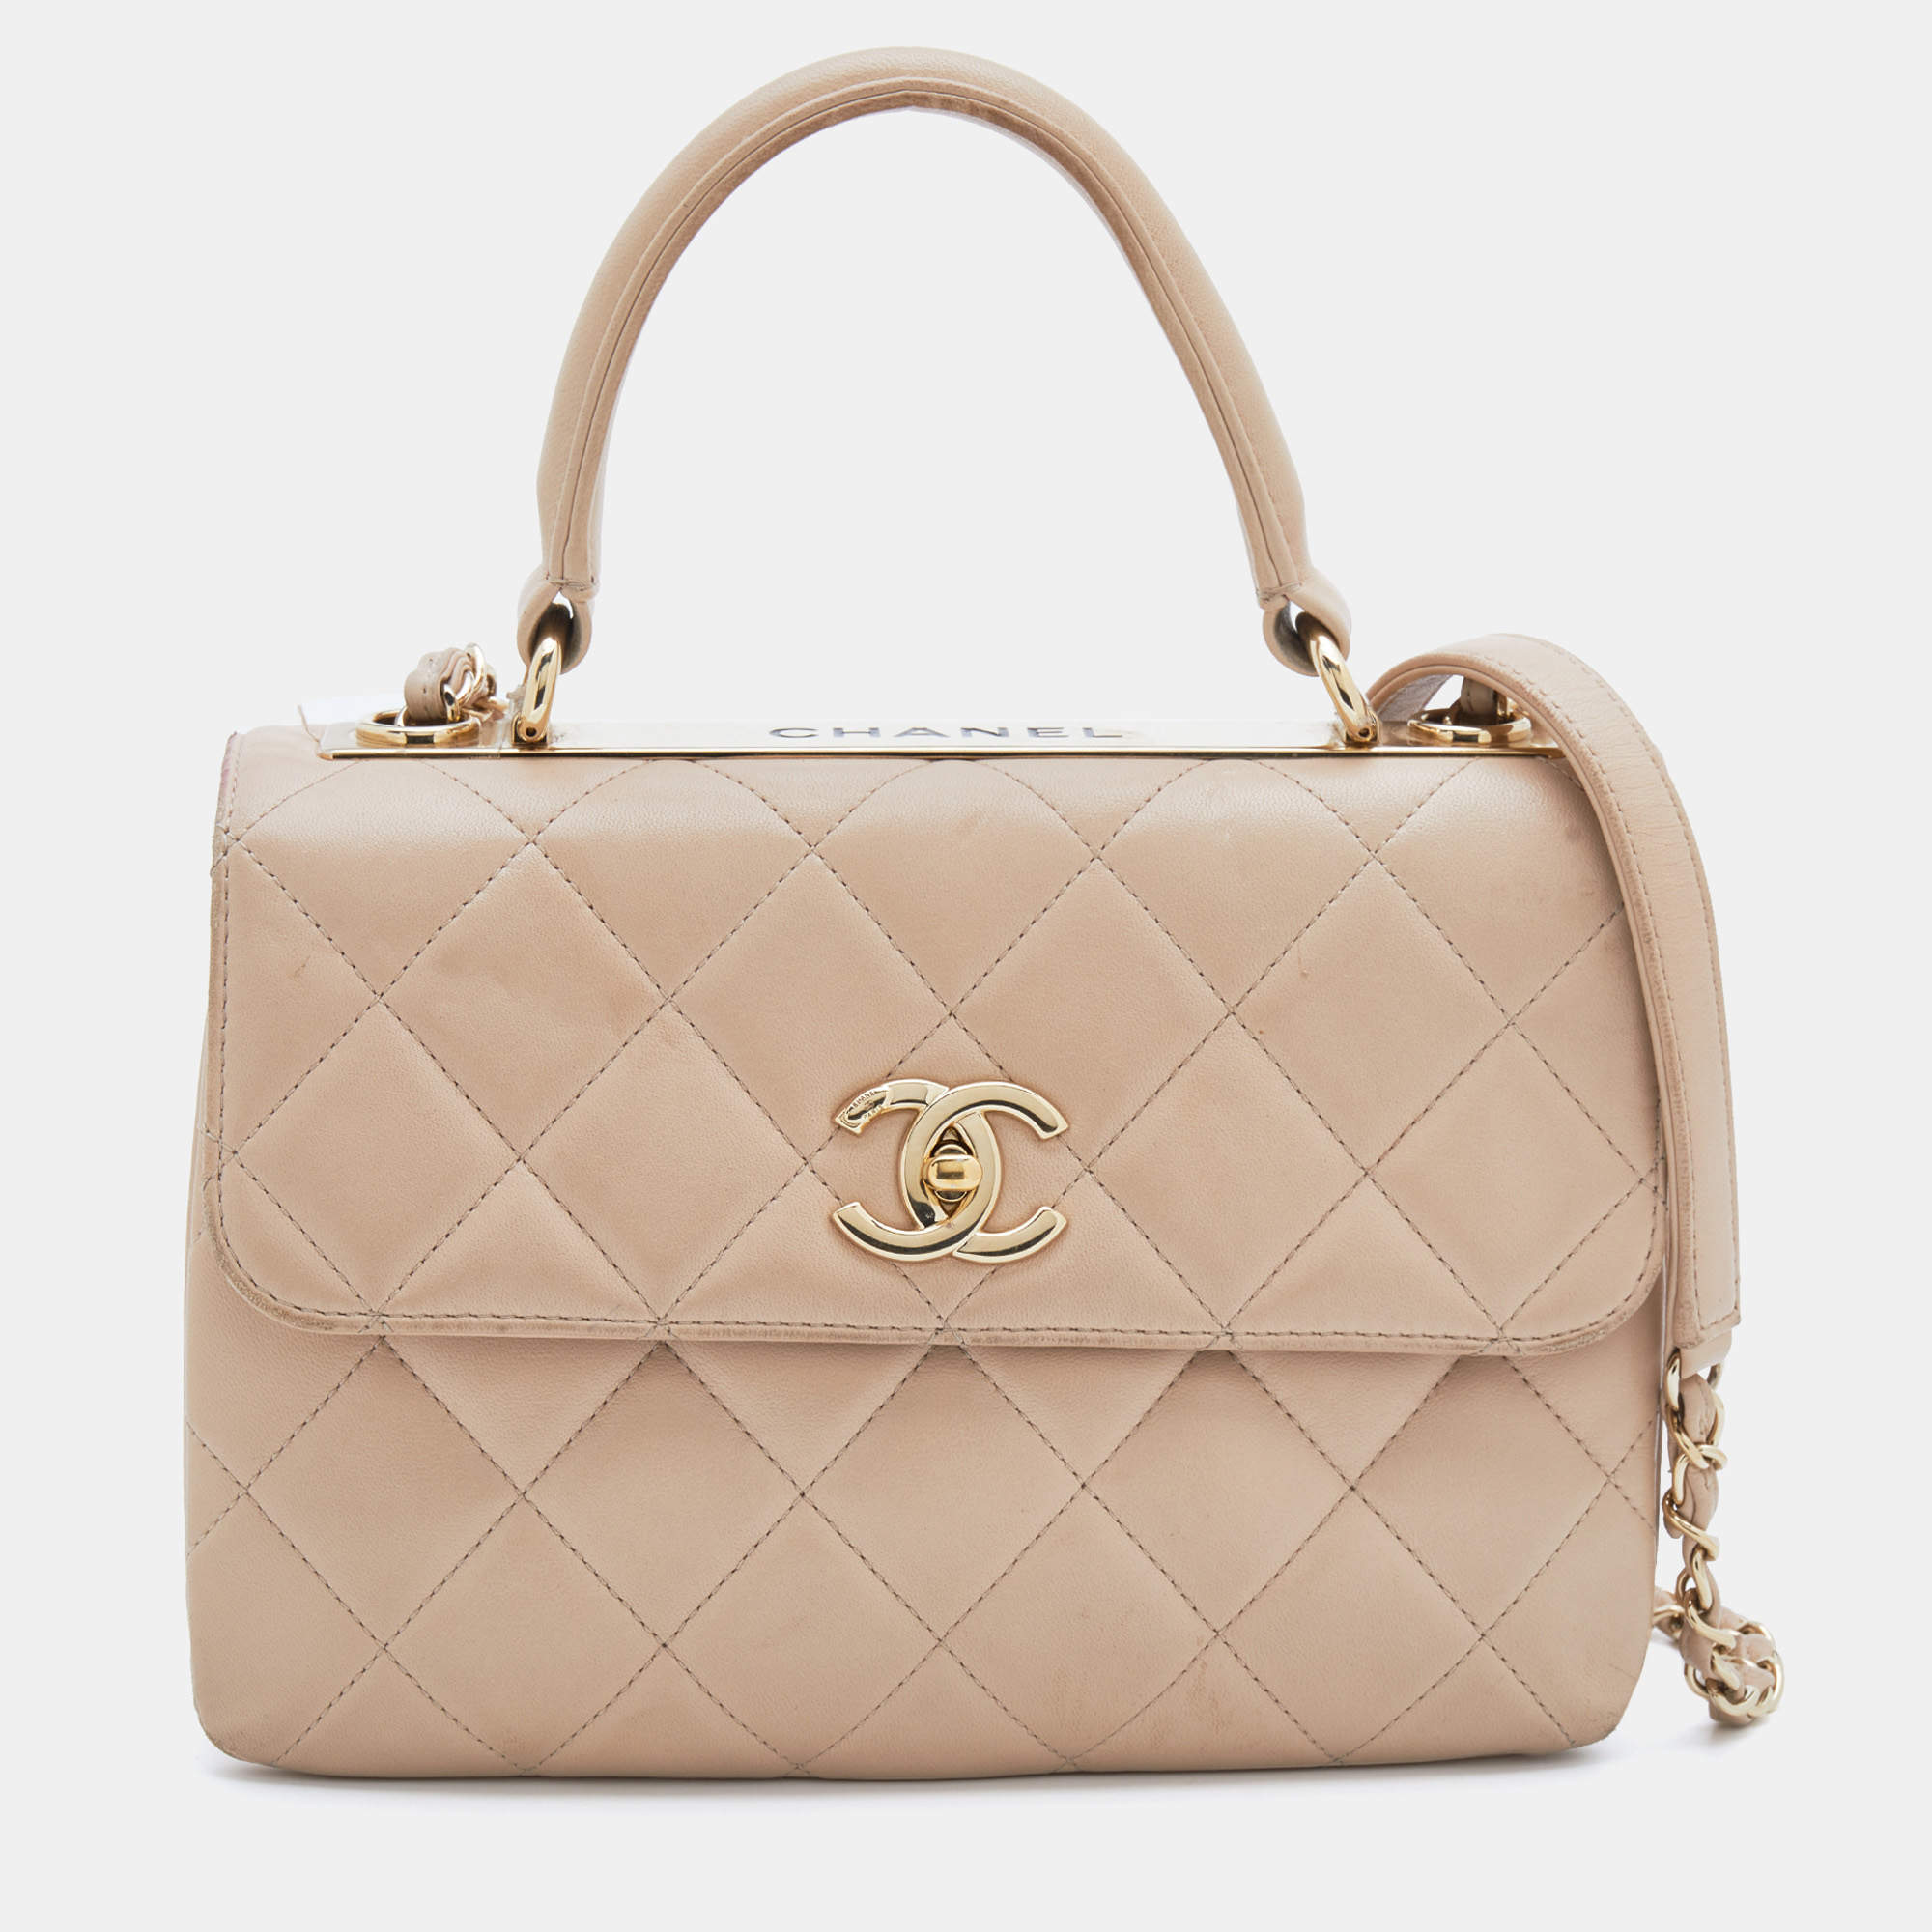 Chanel Beige Quilted Leather Small Trendy CC Flap Bag